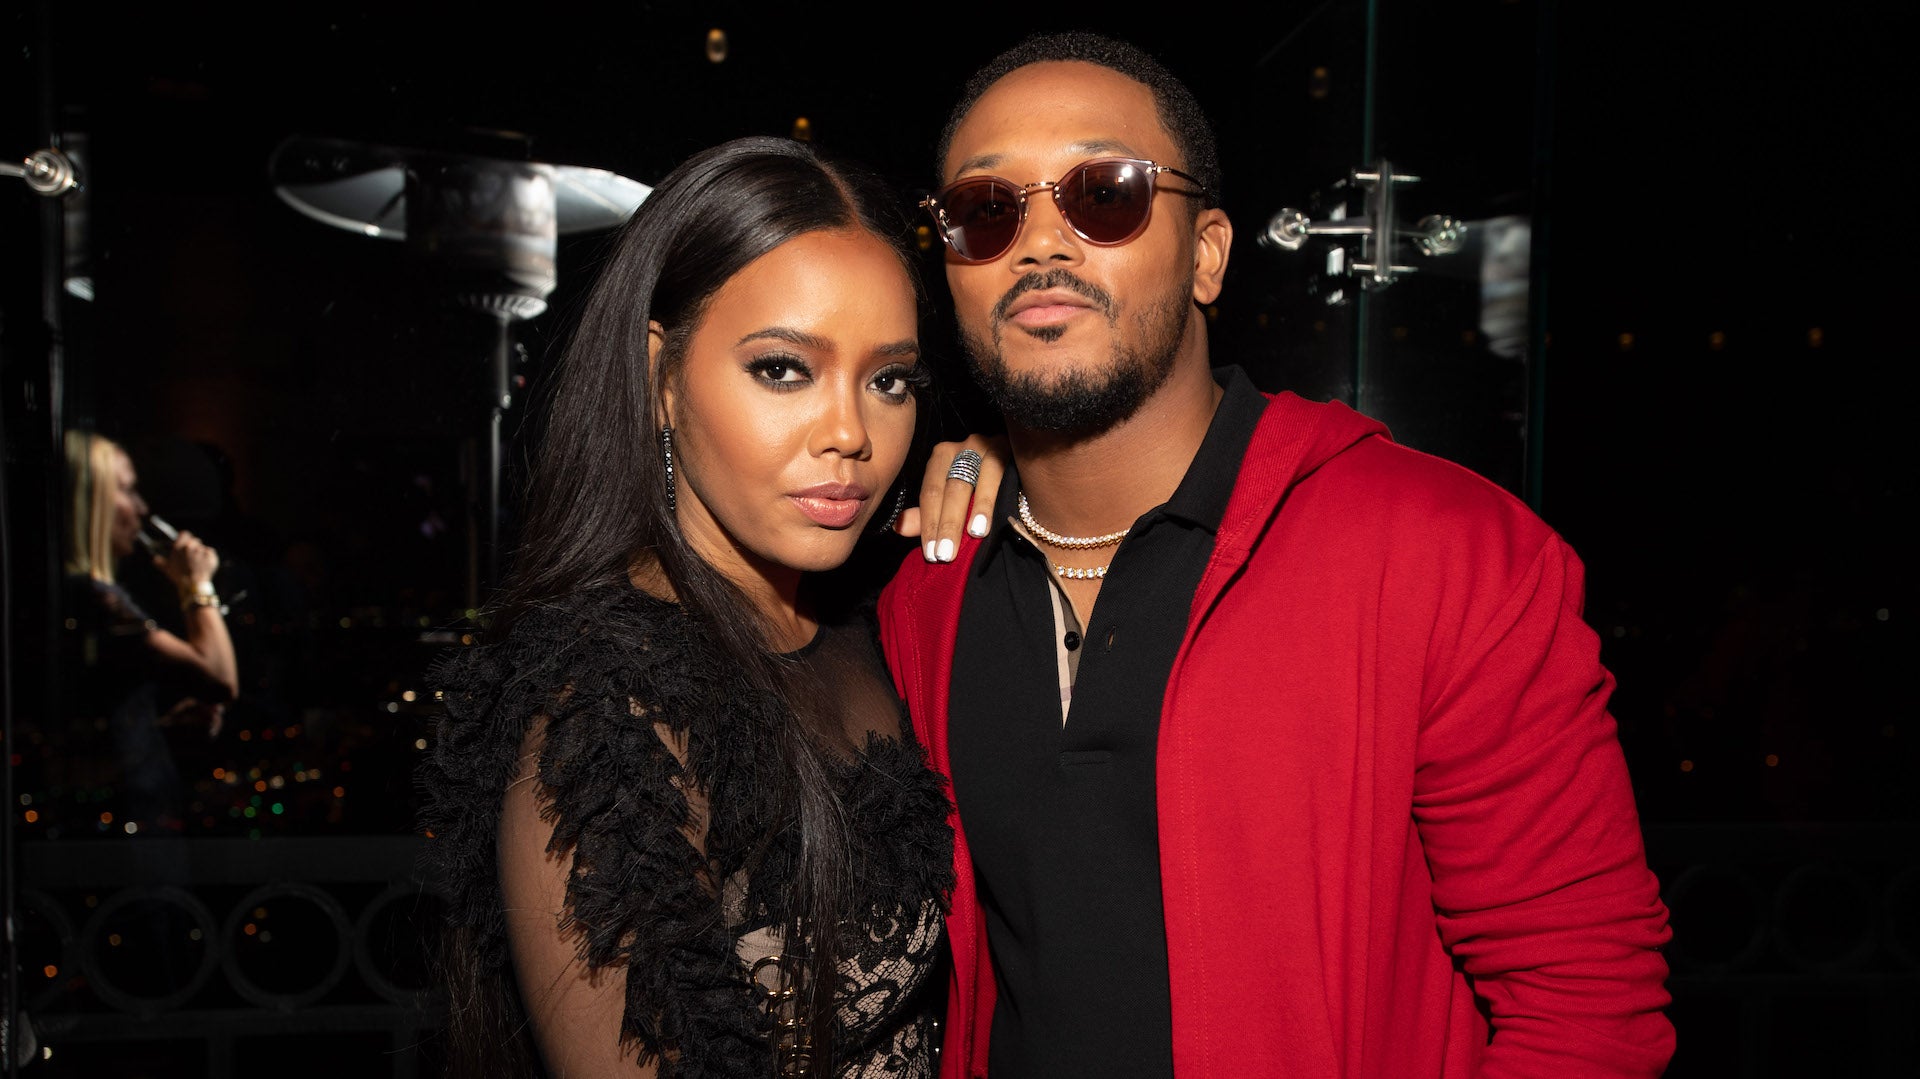 Does Angela Simmons Confront Romeo Miller? 'I'll Have A Conversation, But It'll Be The Last One'